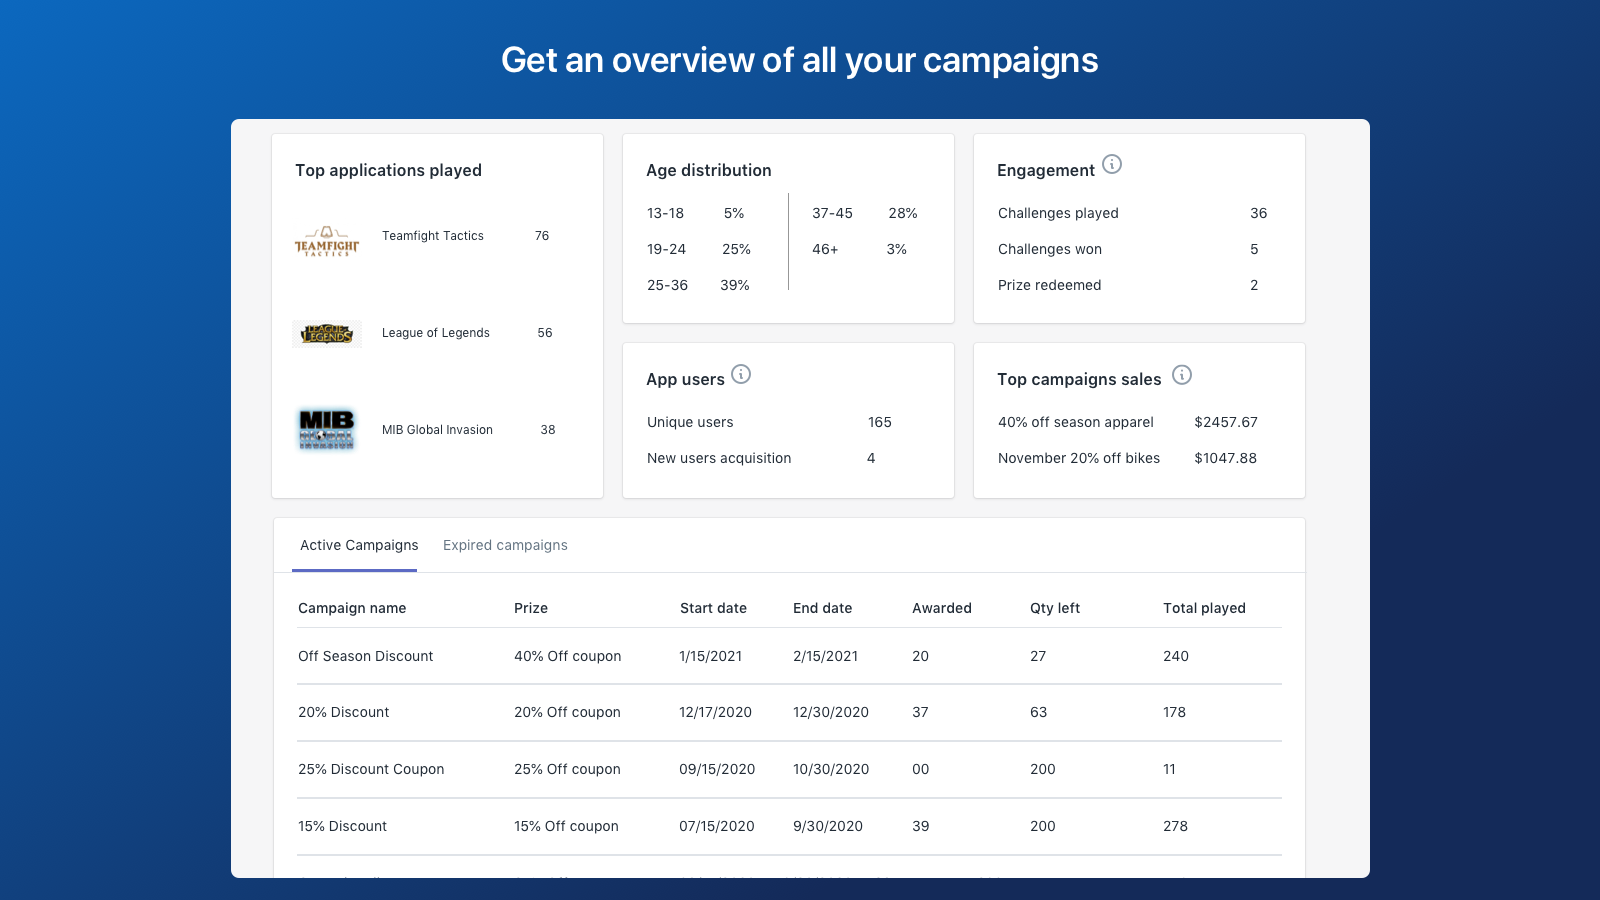 Get an overview of all your campaigns